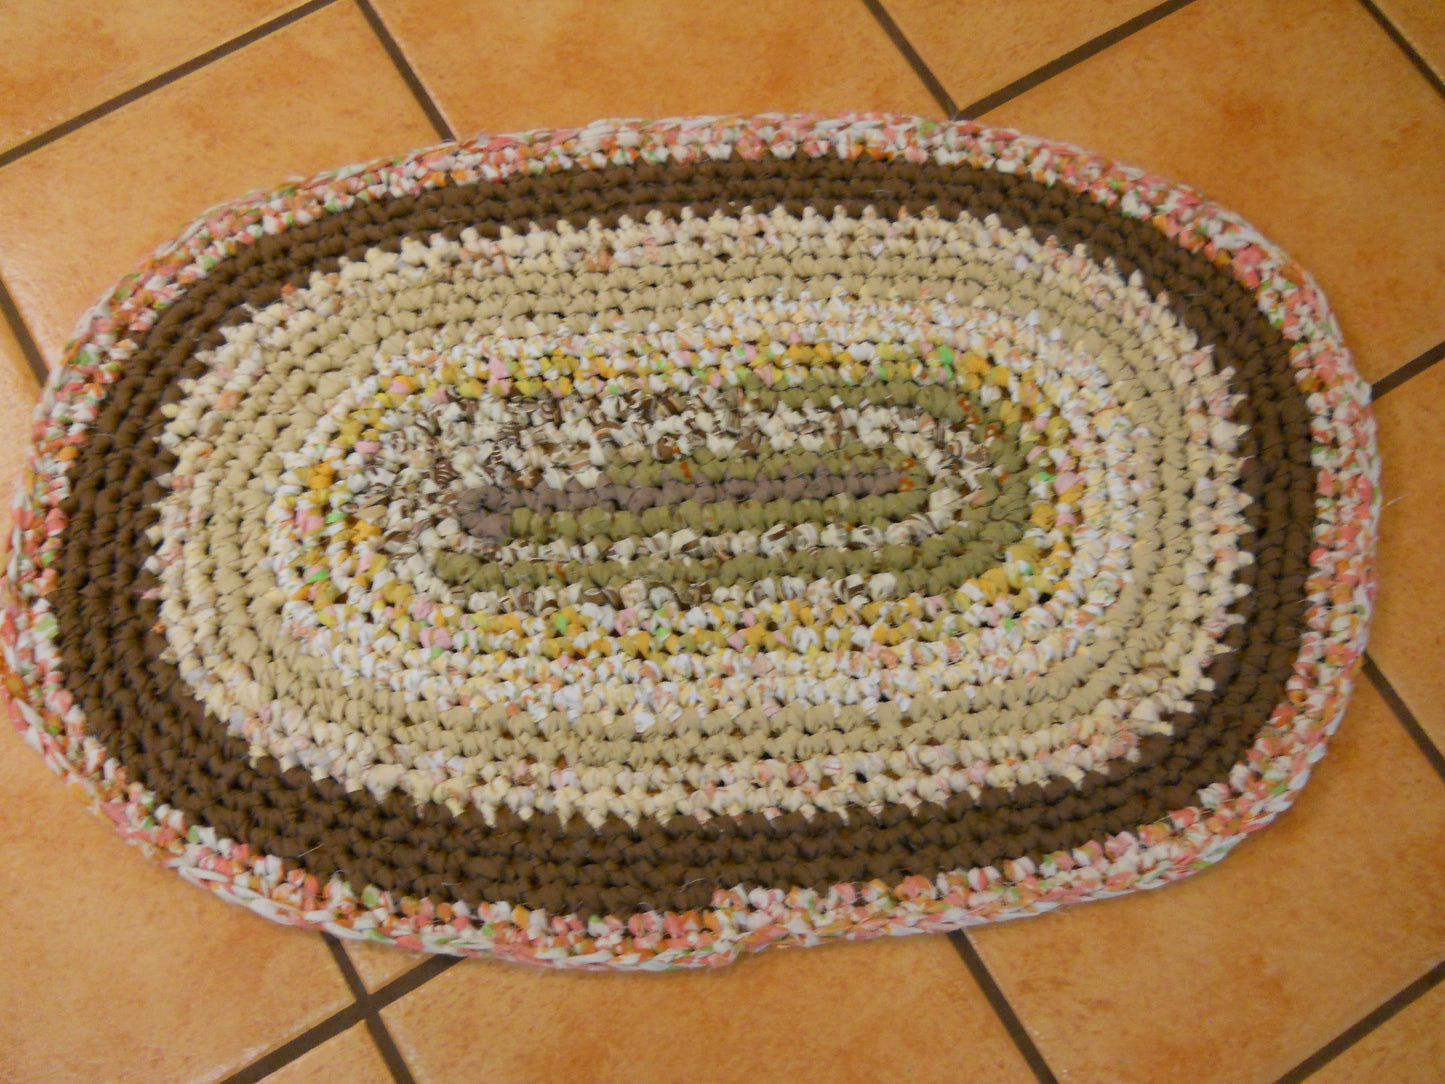 Oval Rag Rug for the Beginner (I recommend this as your first rag rug.)